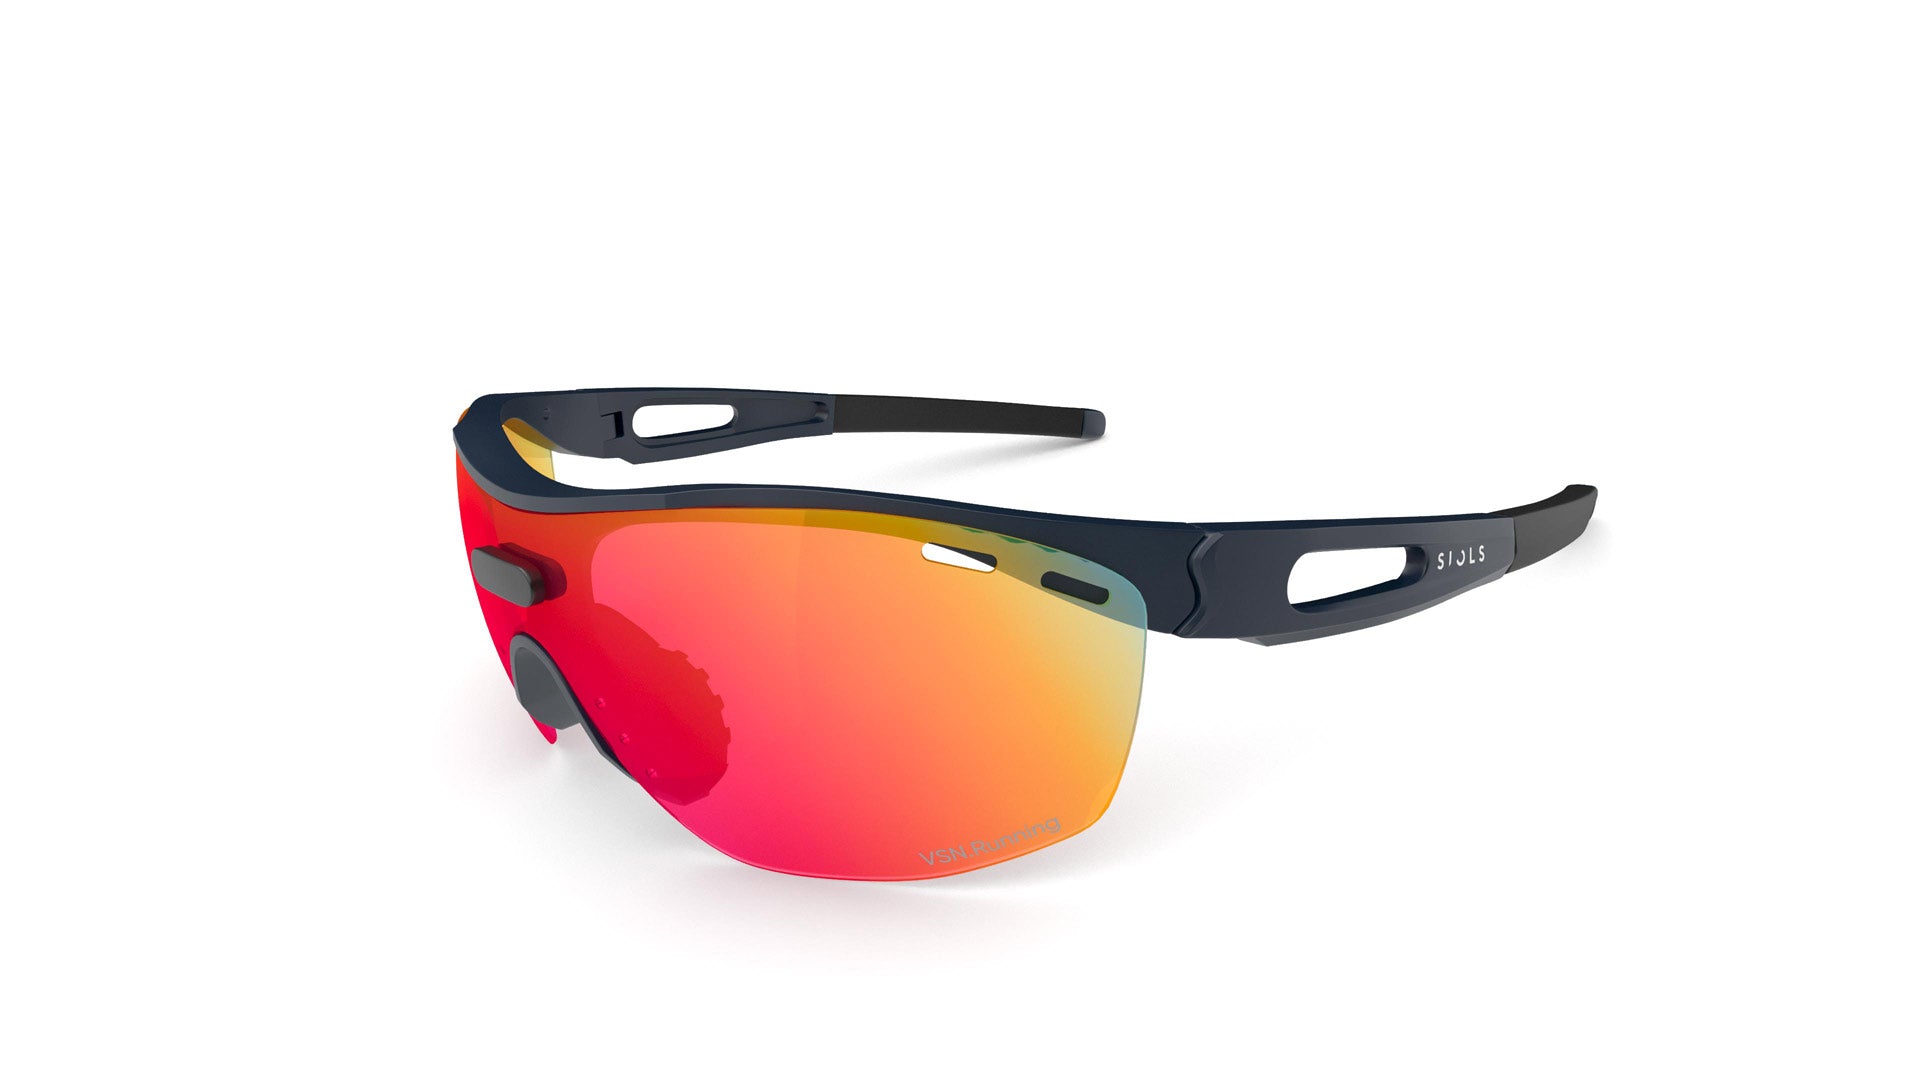 SIOLS.System PRO running sports glasses